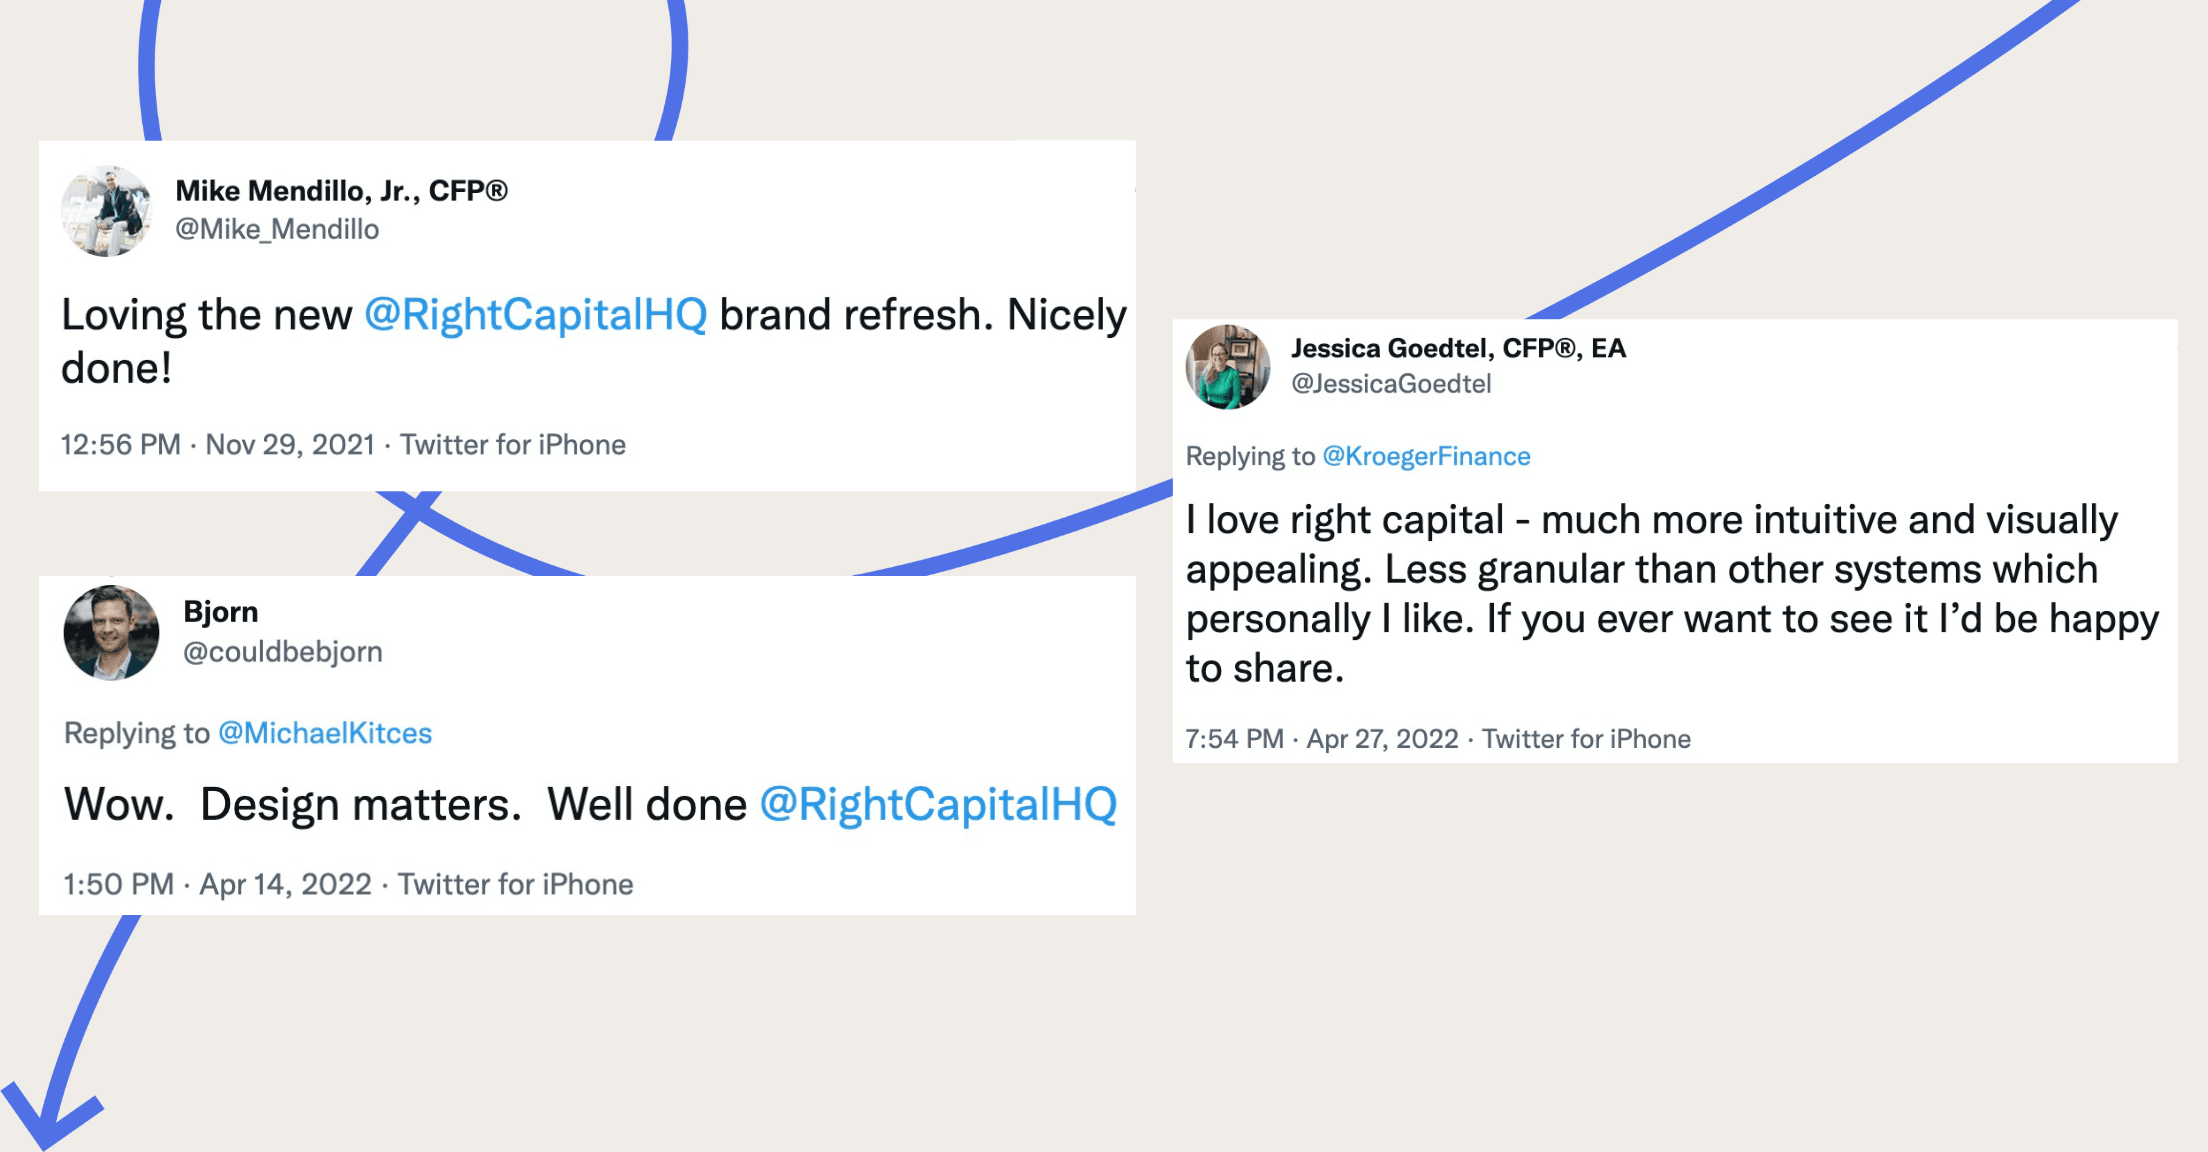 Tweets about how much advisors love the design of RightCapital